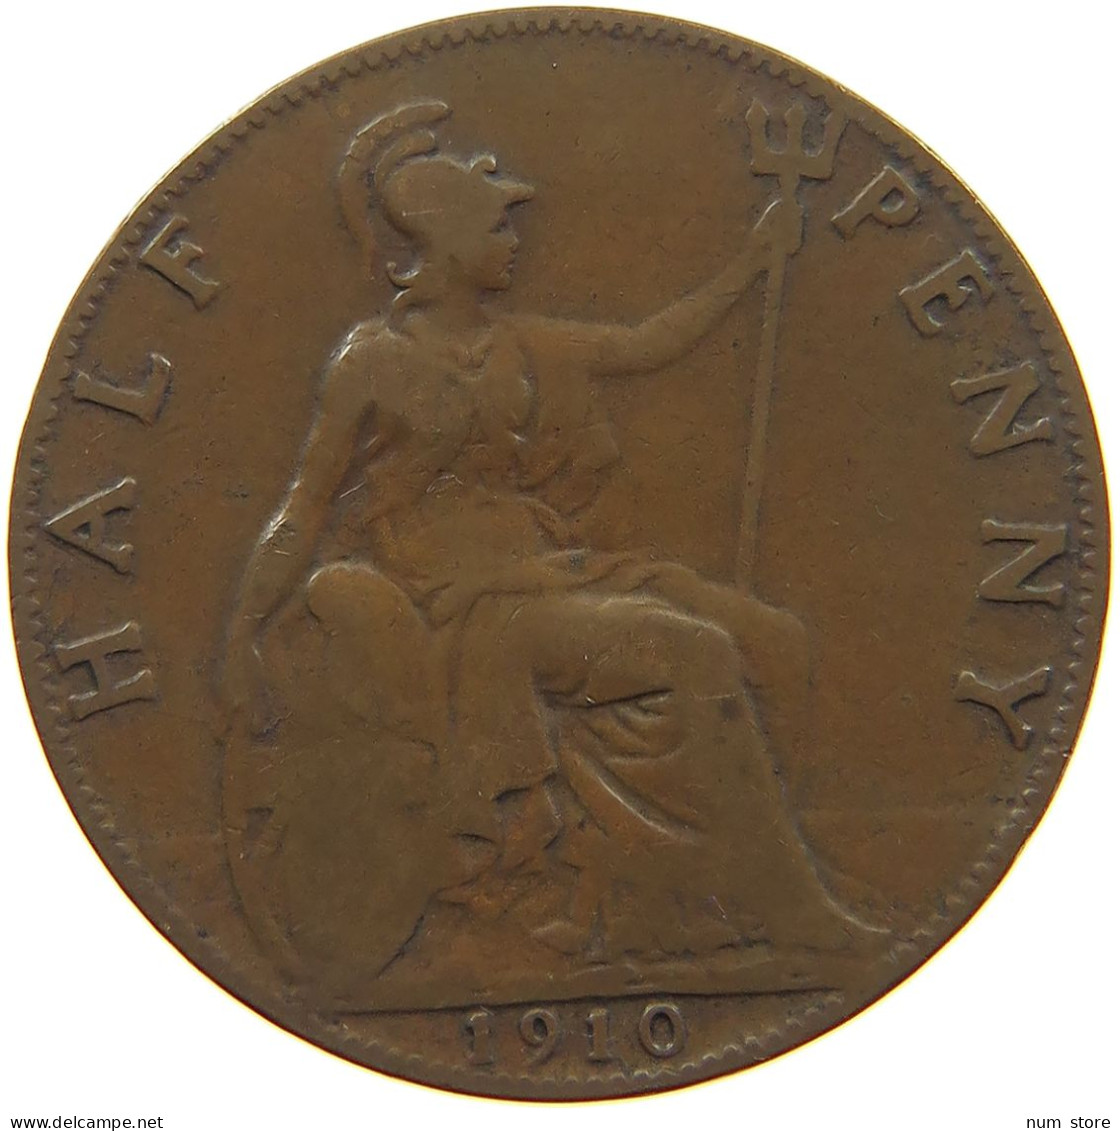 GREAT BRITAIN HALFPENNY 1910 #a066 0263 - C. 1/2 Penny